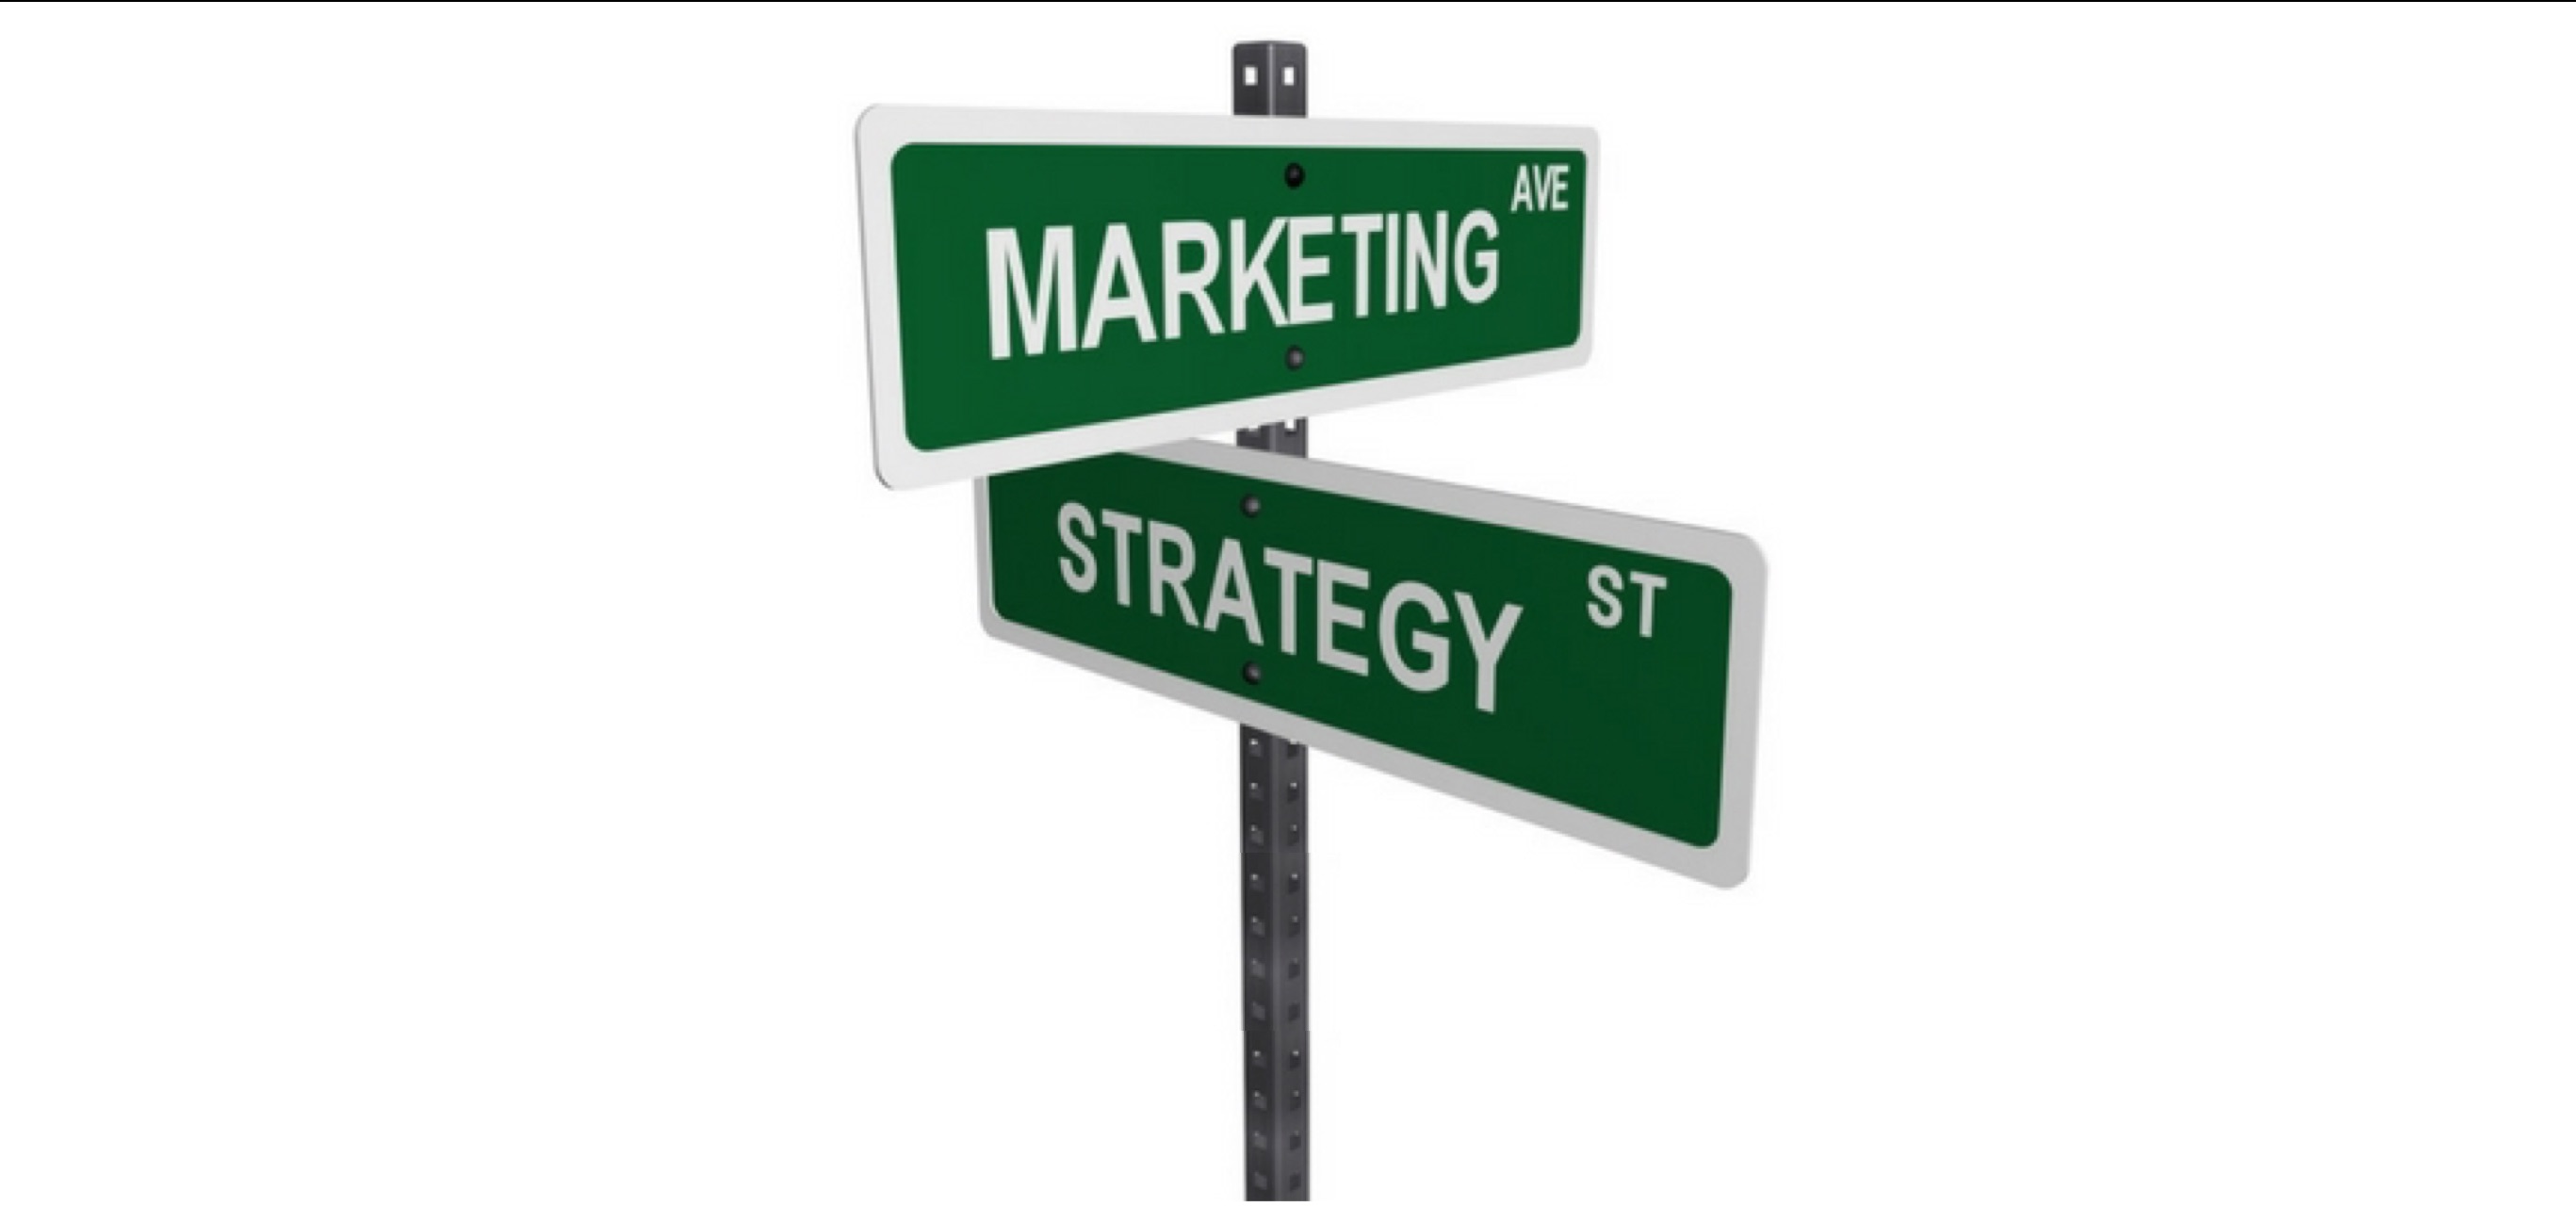 The 7 Marketing Strategy Questions for Entrepreneurs